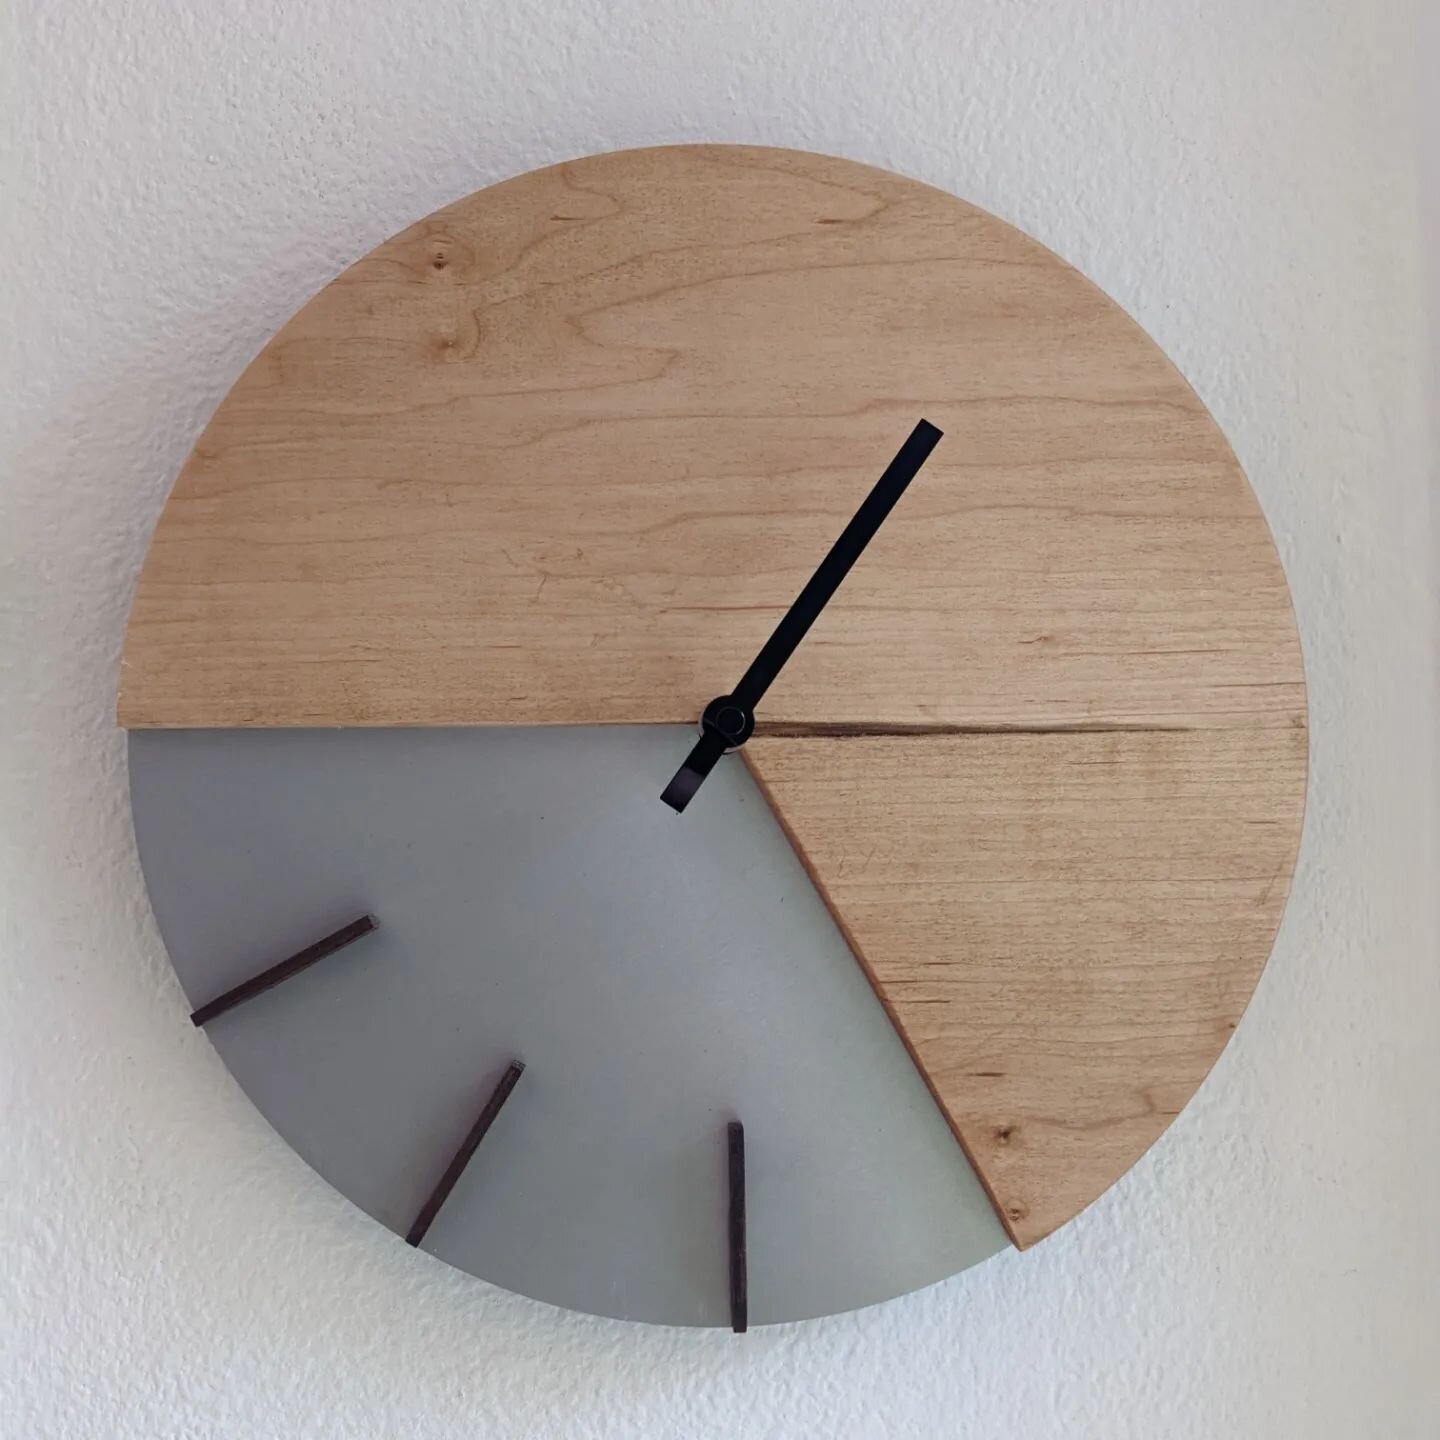 Anti-capitalist wall clock

I've been reading Michael Pollan's new book 'this is your mind on plant'. @michael.pollan
Caffeine has a interesting relationship with our current world... &quot;Surely it is more than a coincidence that caffeine and the m